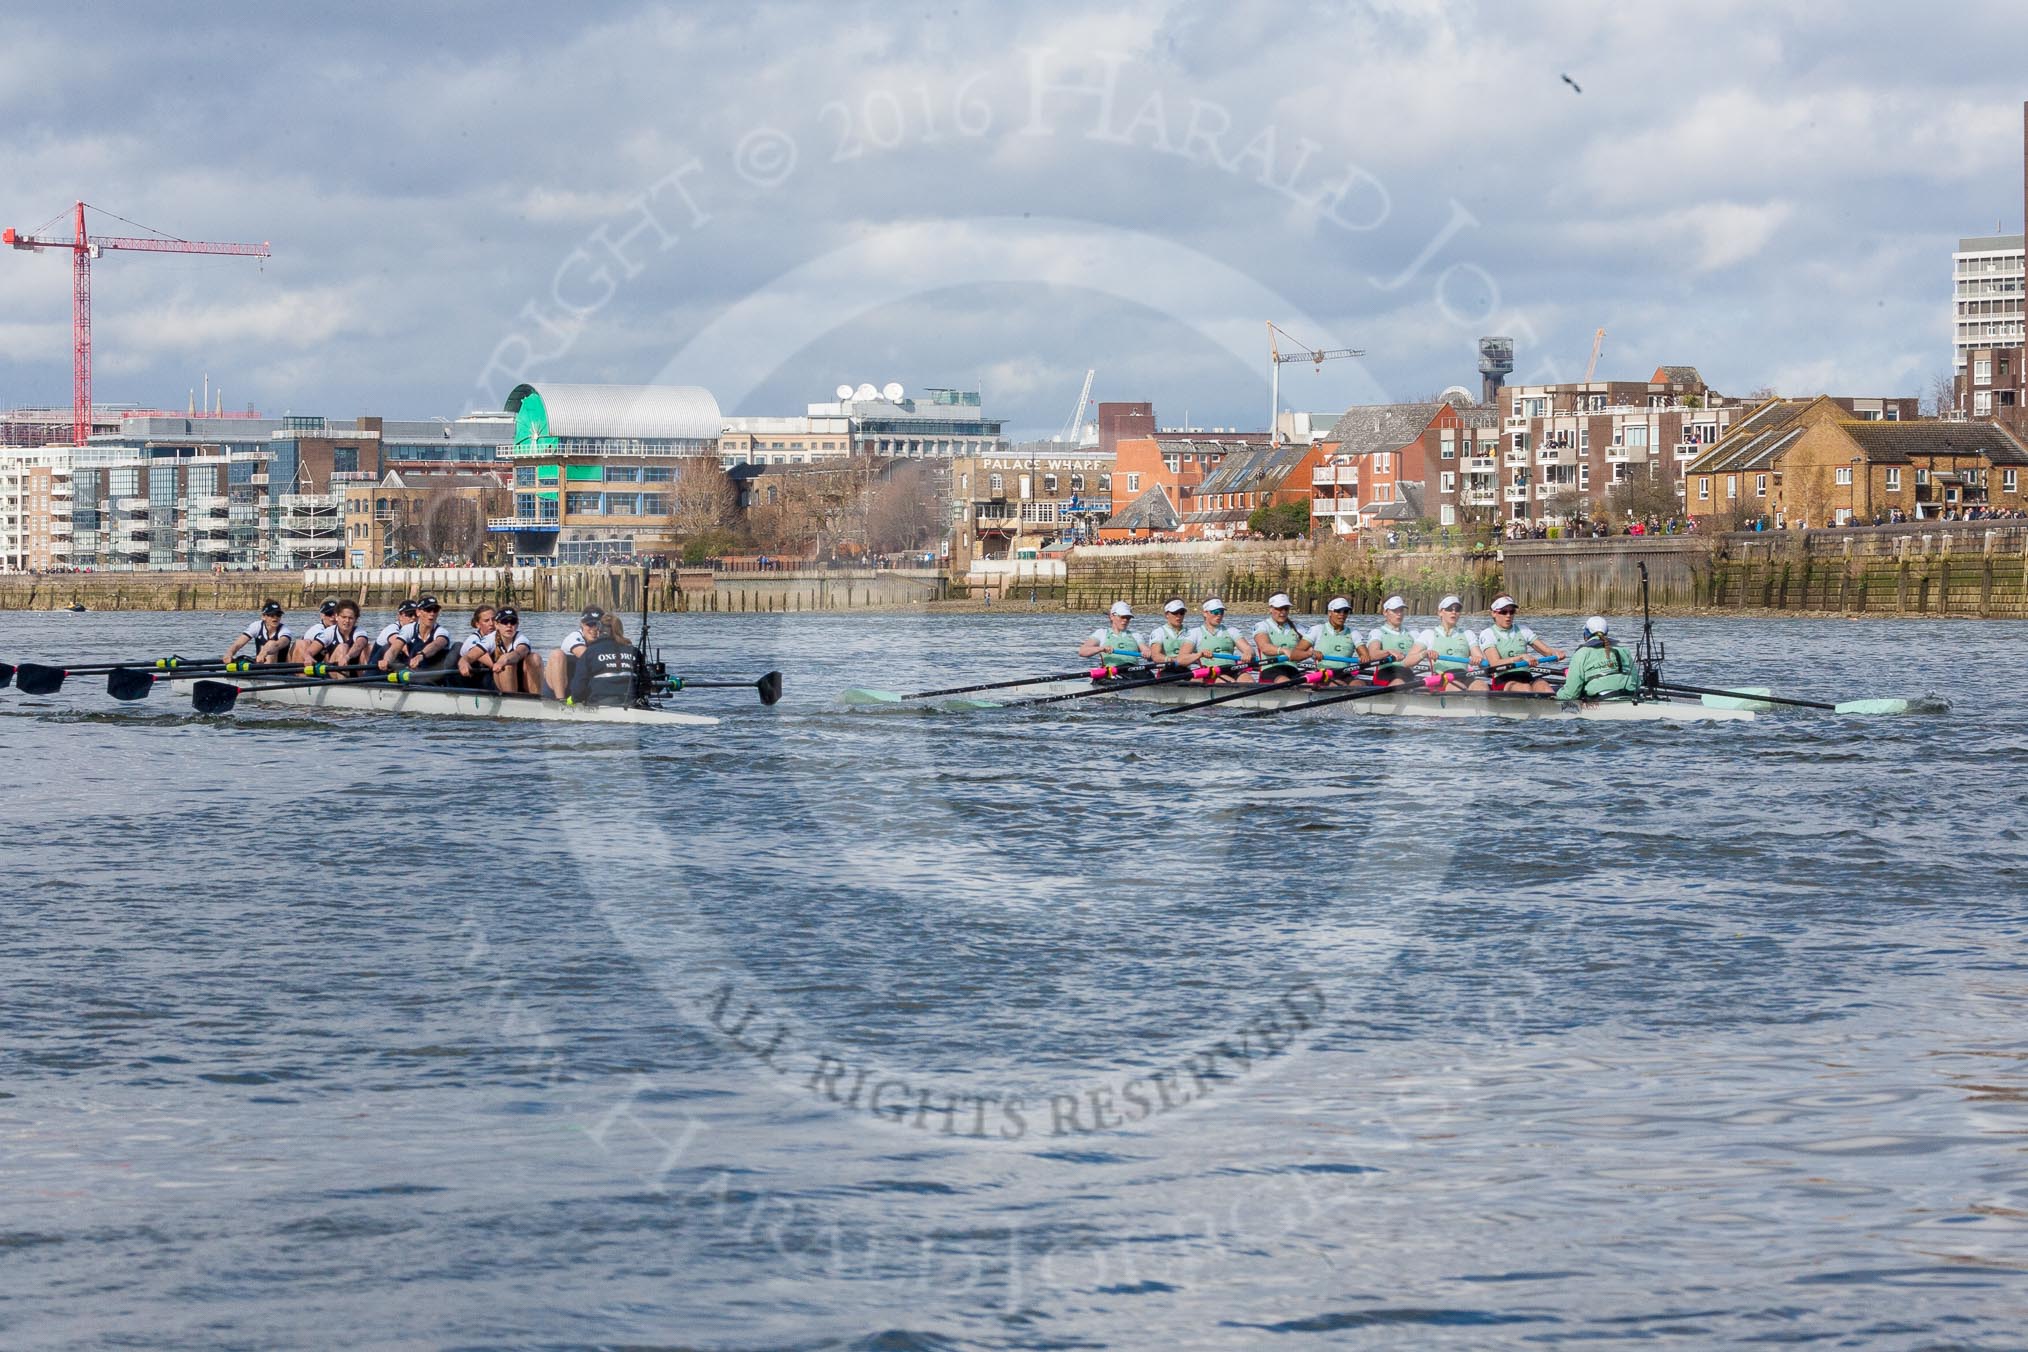 The Boat Race season 2016 -  The Cancer Research Women's Boat Race.
River Thames between Putney Bridge and Mortlake,
London SW15,

United Kingdom,
on 27 March 2016 at 14:14, image #209